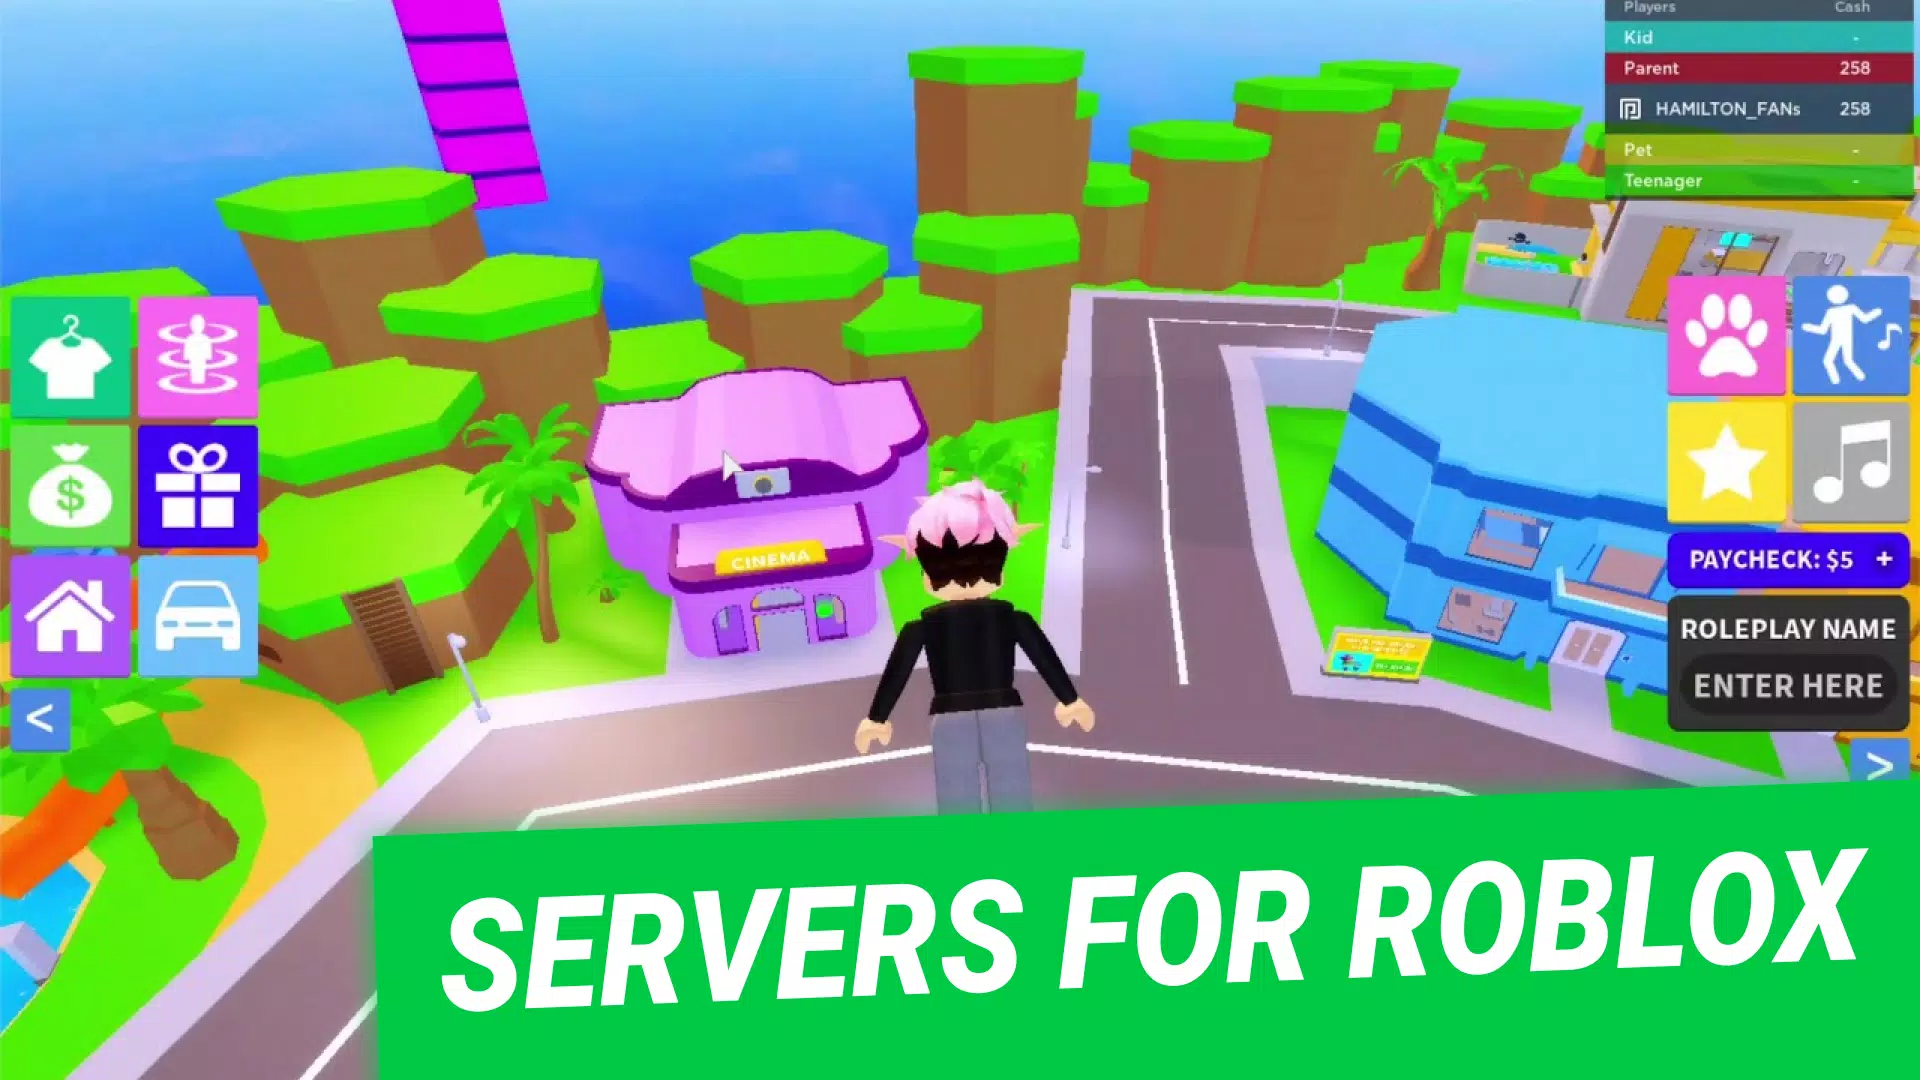 Roblox Studio Apk v4.0.0 Download For Android and IOS Free